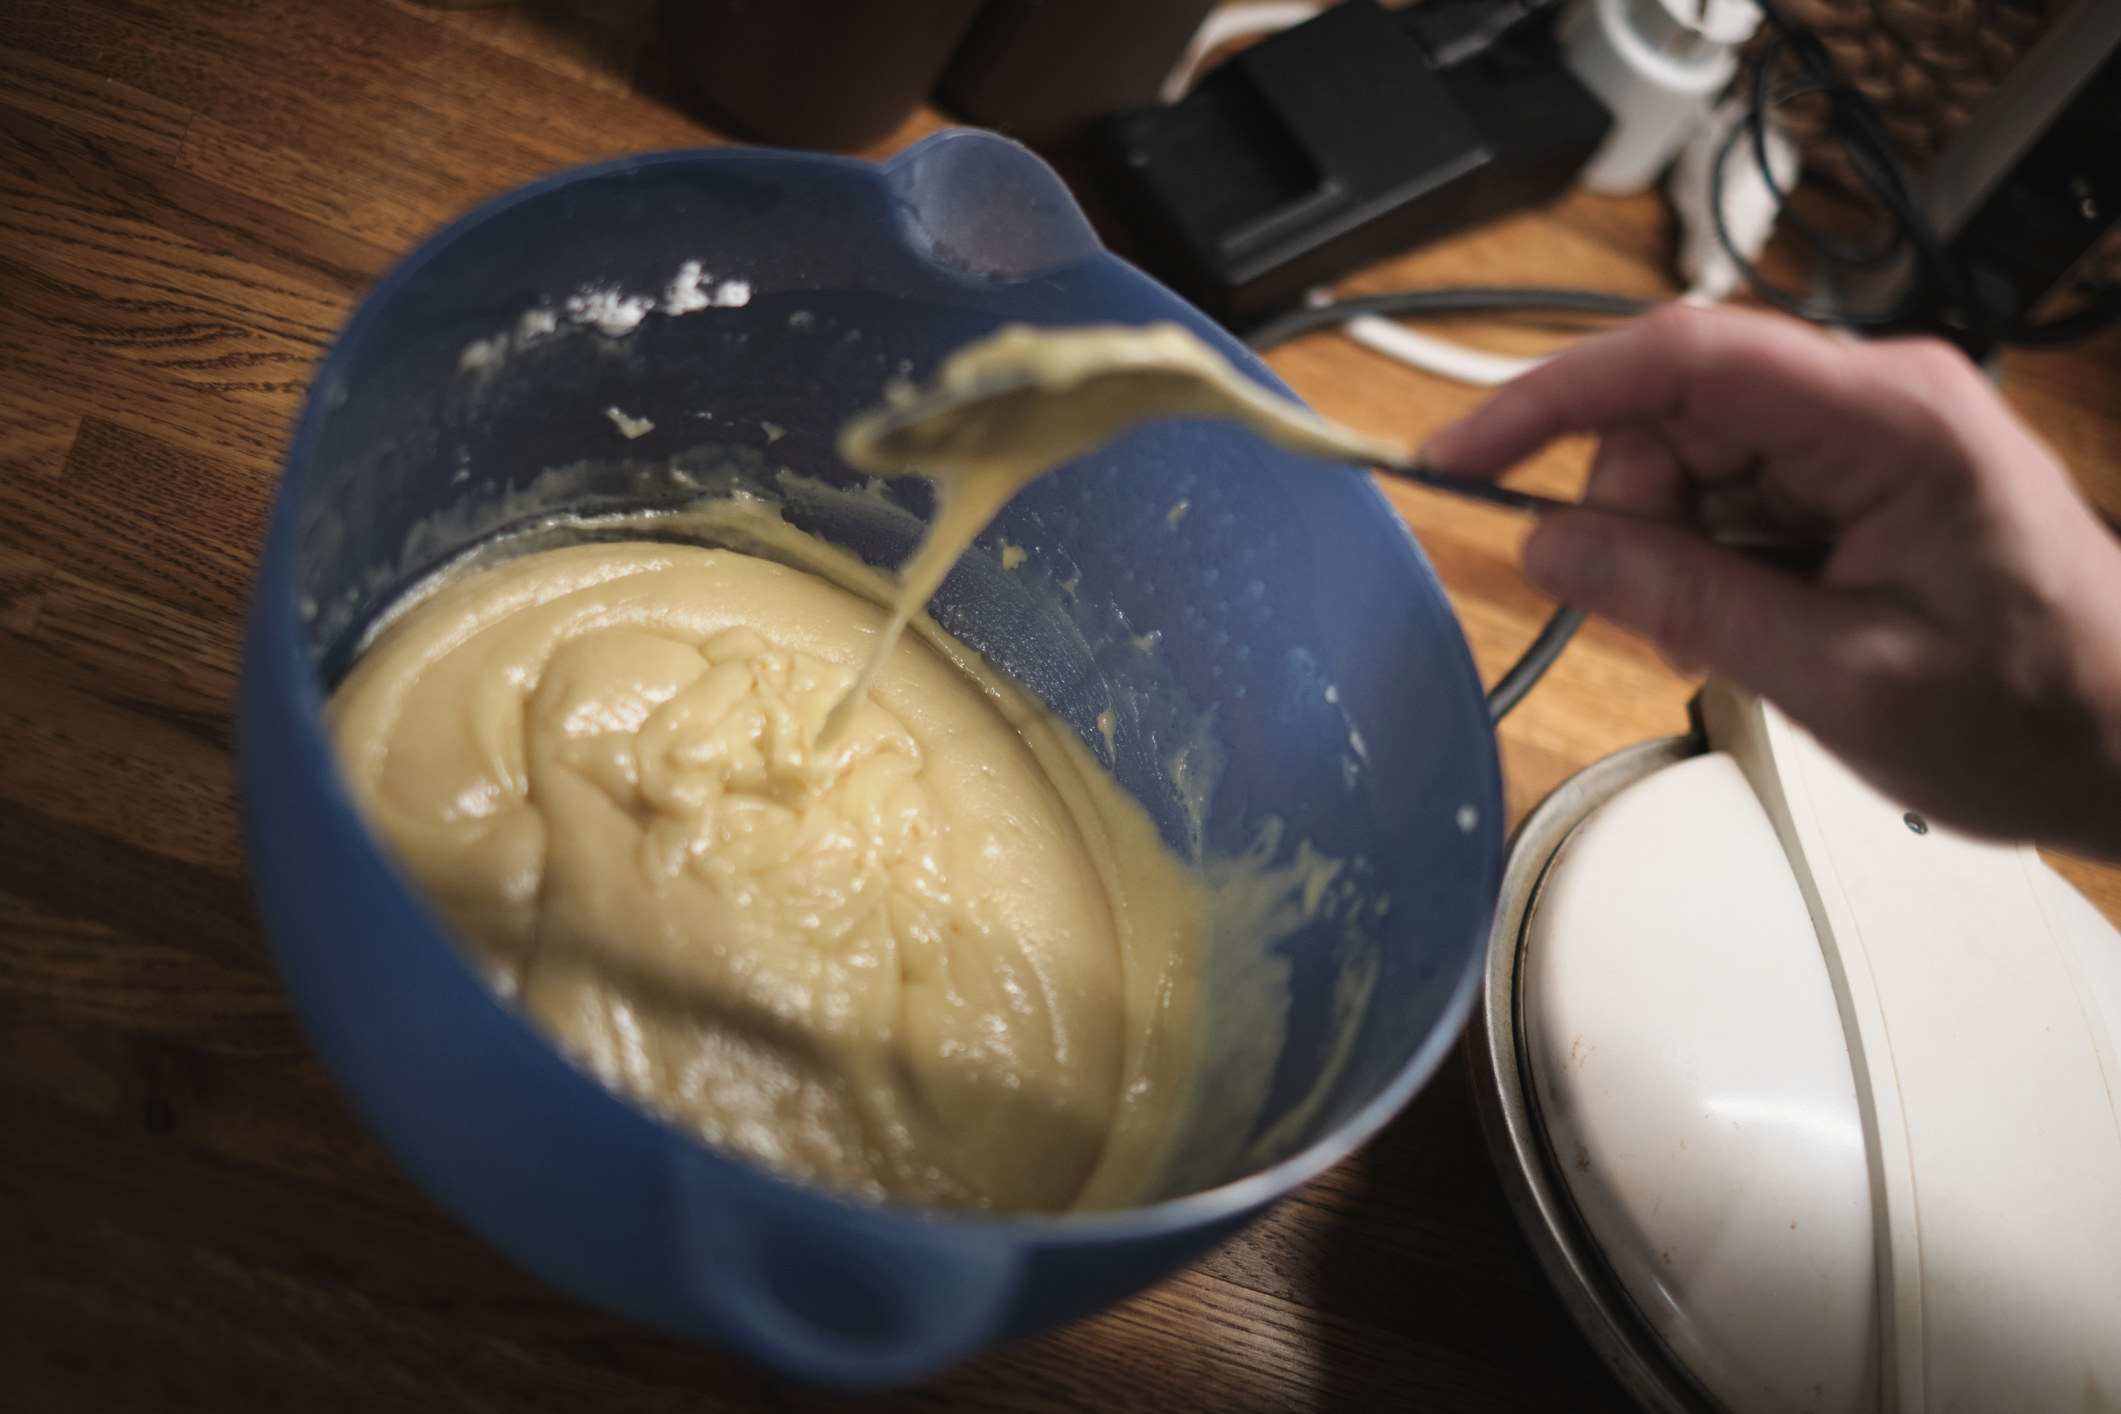 Hand with spoon mixing cake batter.